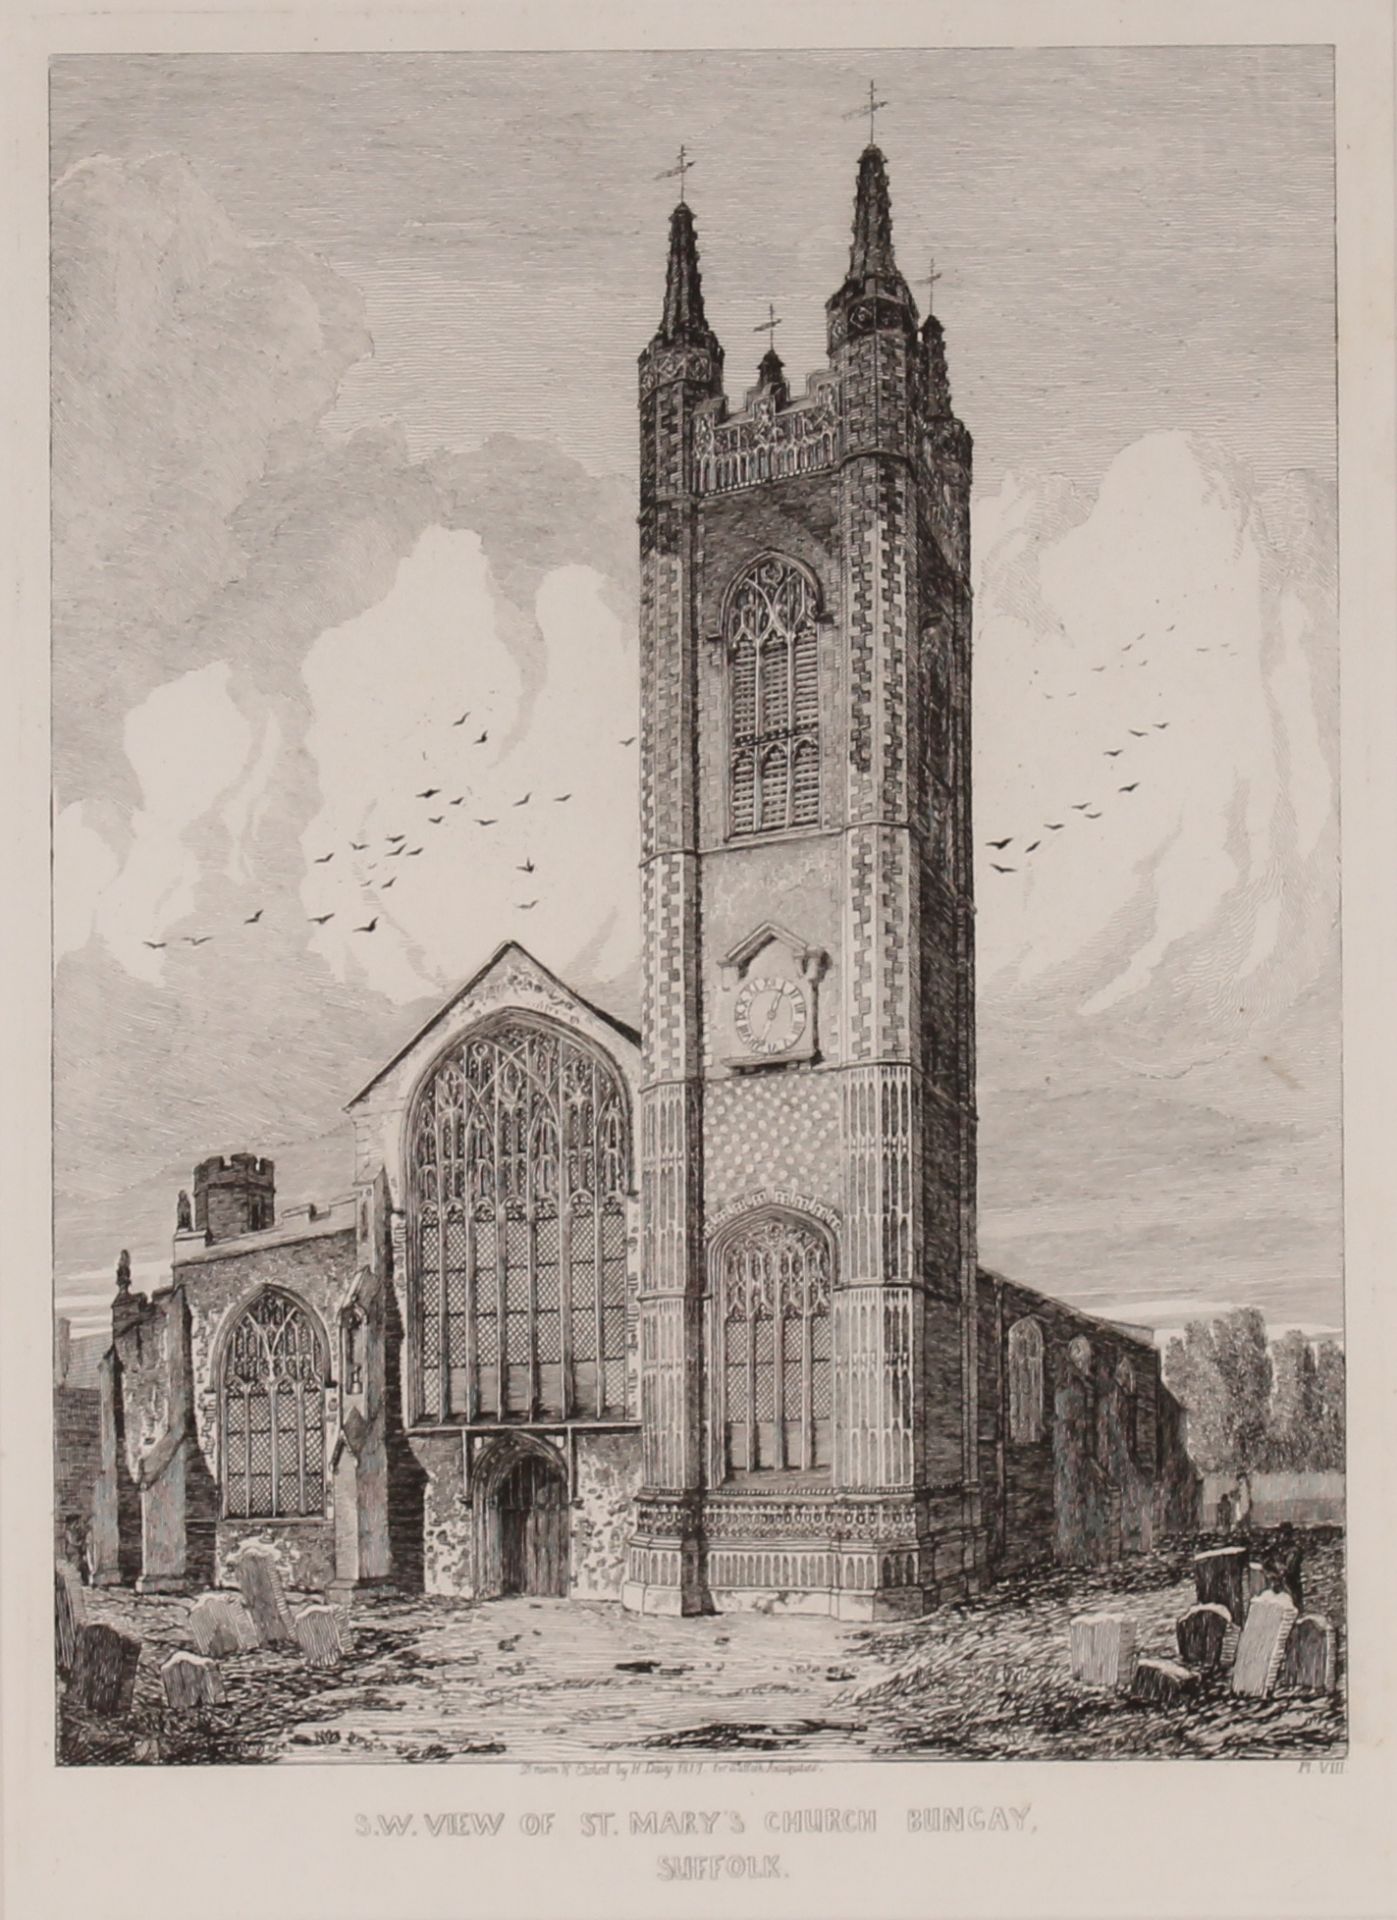 Henry Davey, three etchings depicting the North West view of St Mary's Church, Bungay, the South